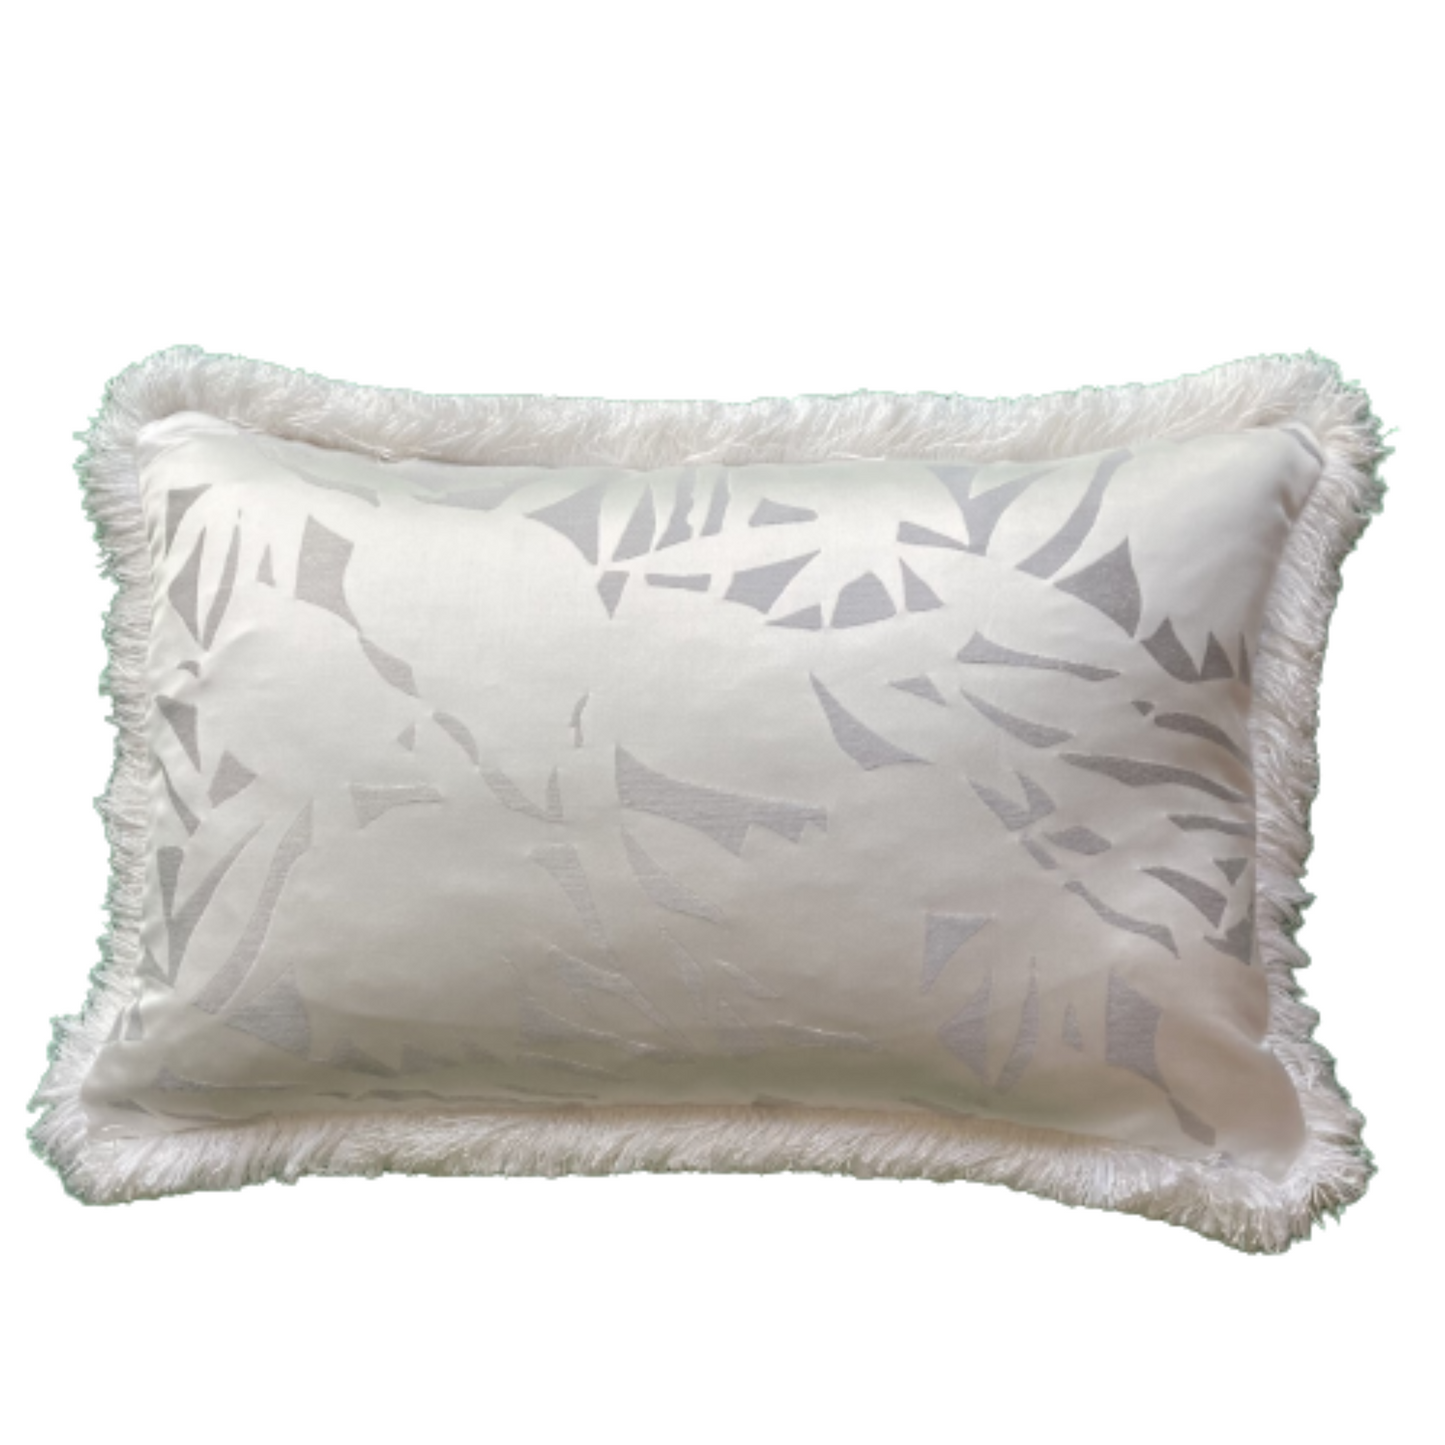 Nights In White Satin Glam 15 X 23 Rectangle Pillow with Down Feather Insert